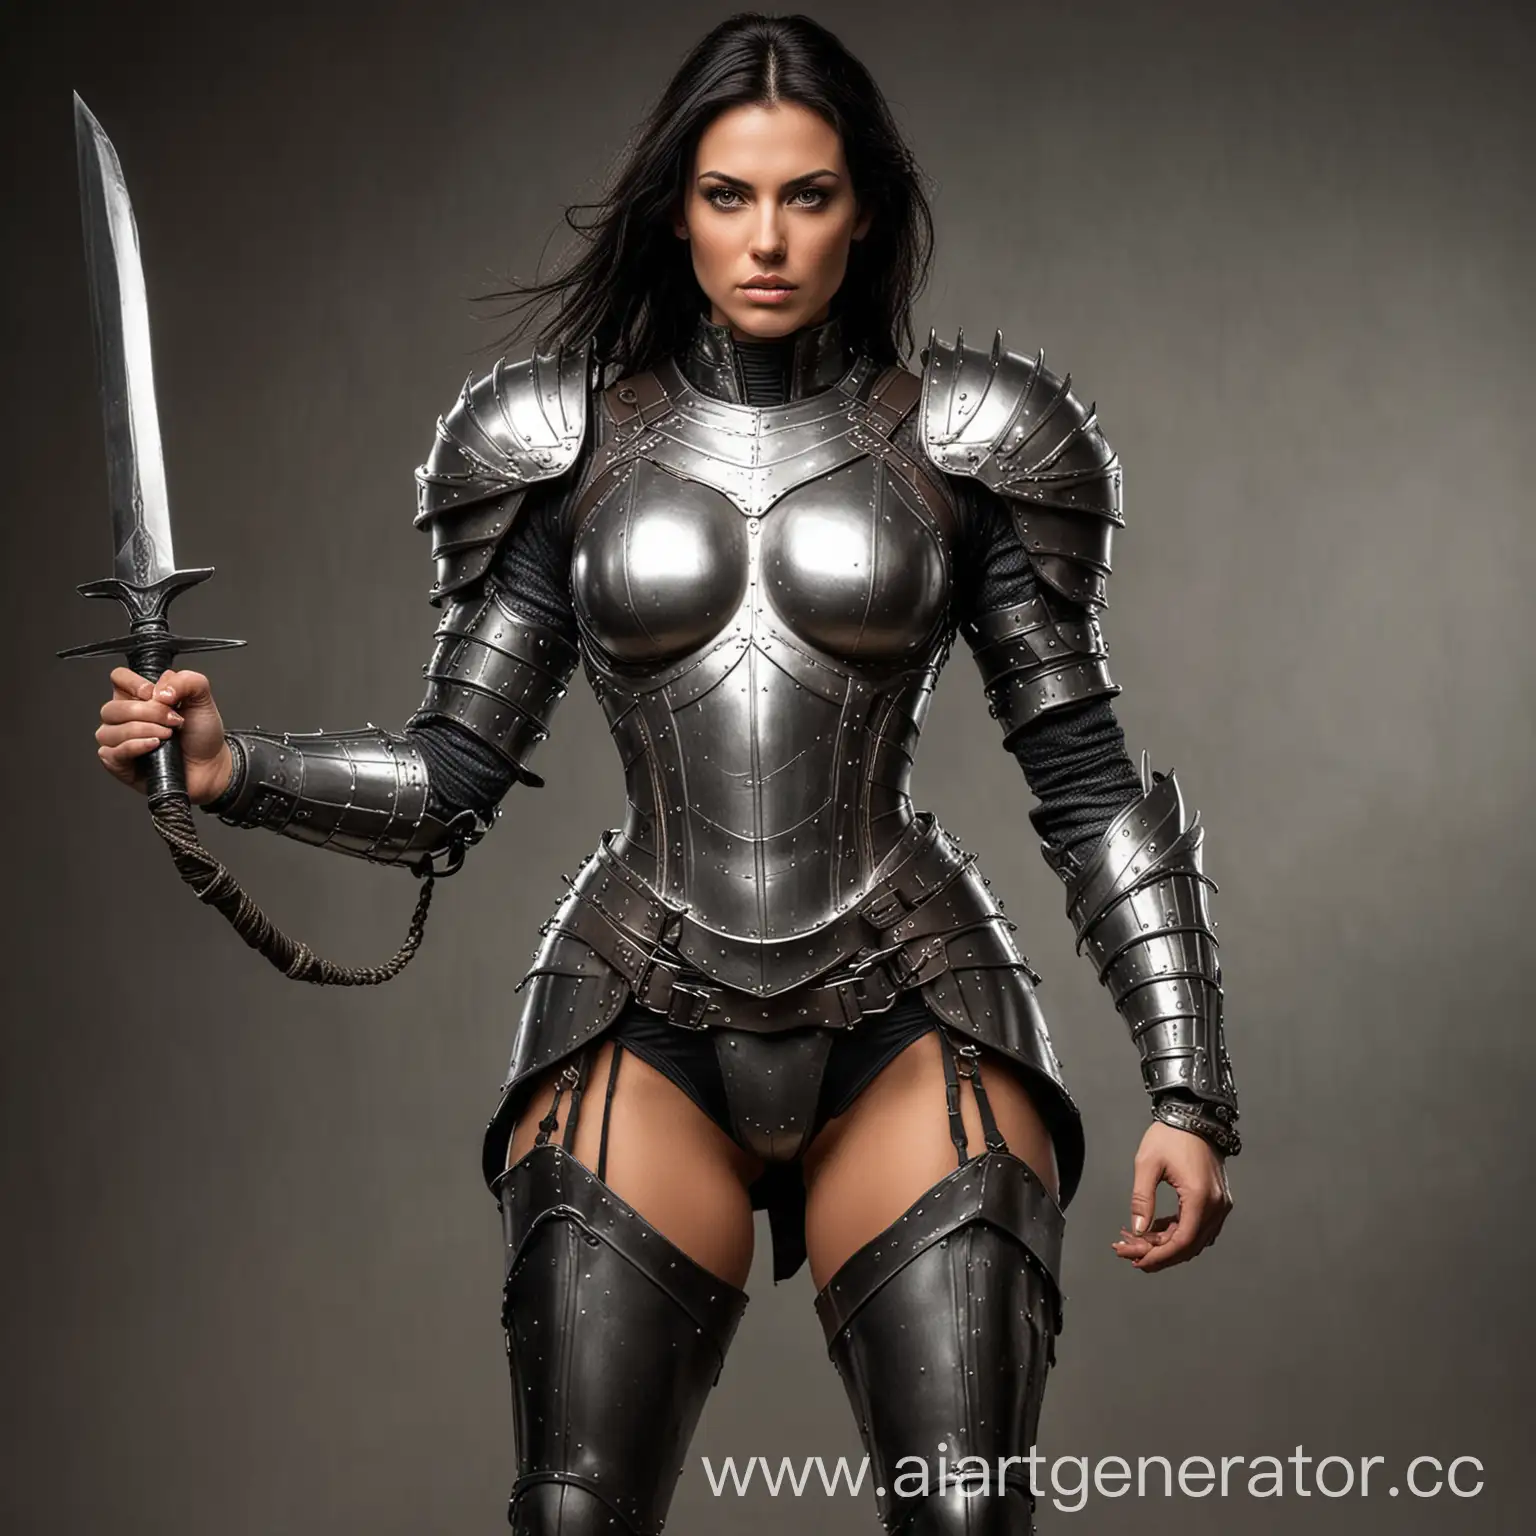 Dominant-DarkHaired-Woman-in-Reinforced-Leather-Armor-with-Whip